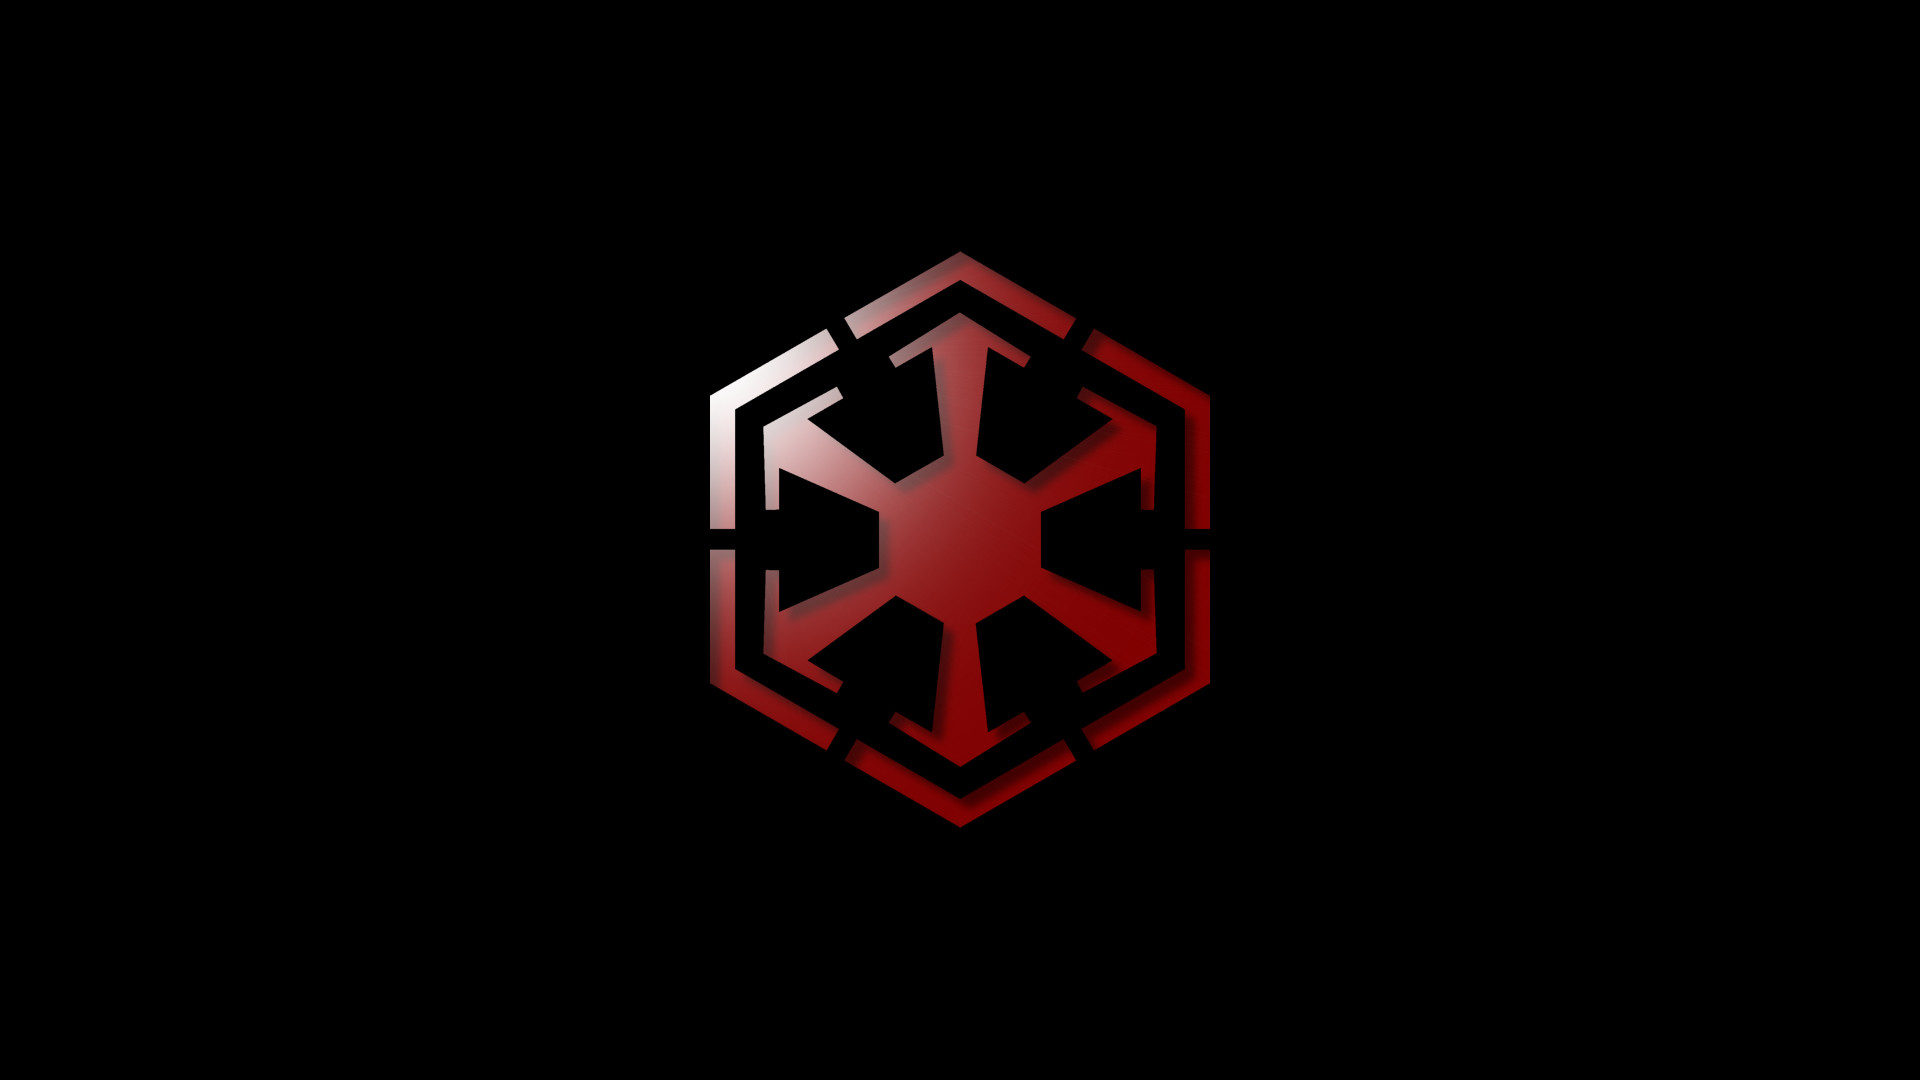 1920x1080 ... The Simple SWTOR Sith Wallpaper by DistantWanderer